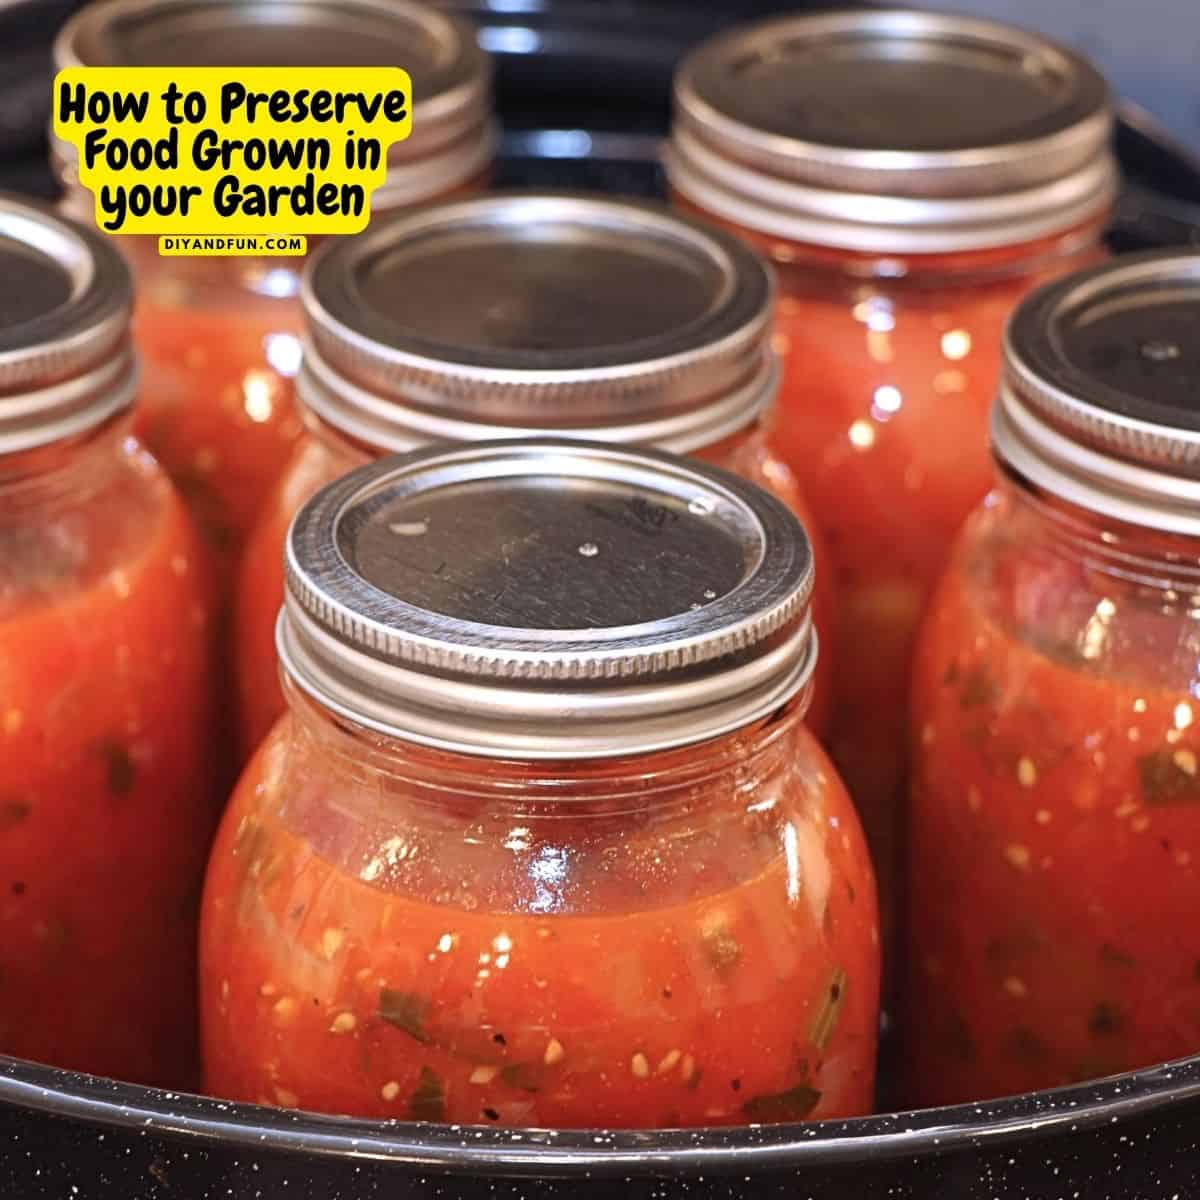 How to Preserve Food Grown in your Garden, includes tips on canning, freezing, and drying food. Enjoy your homegrown food all year long.